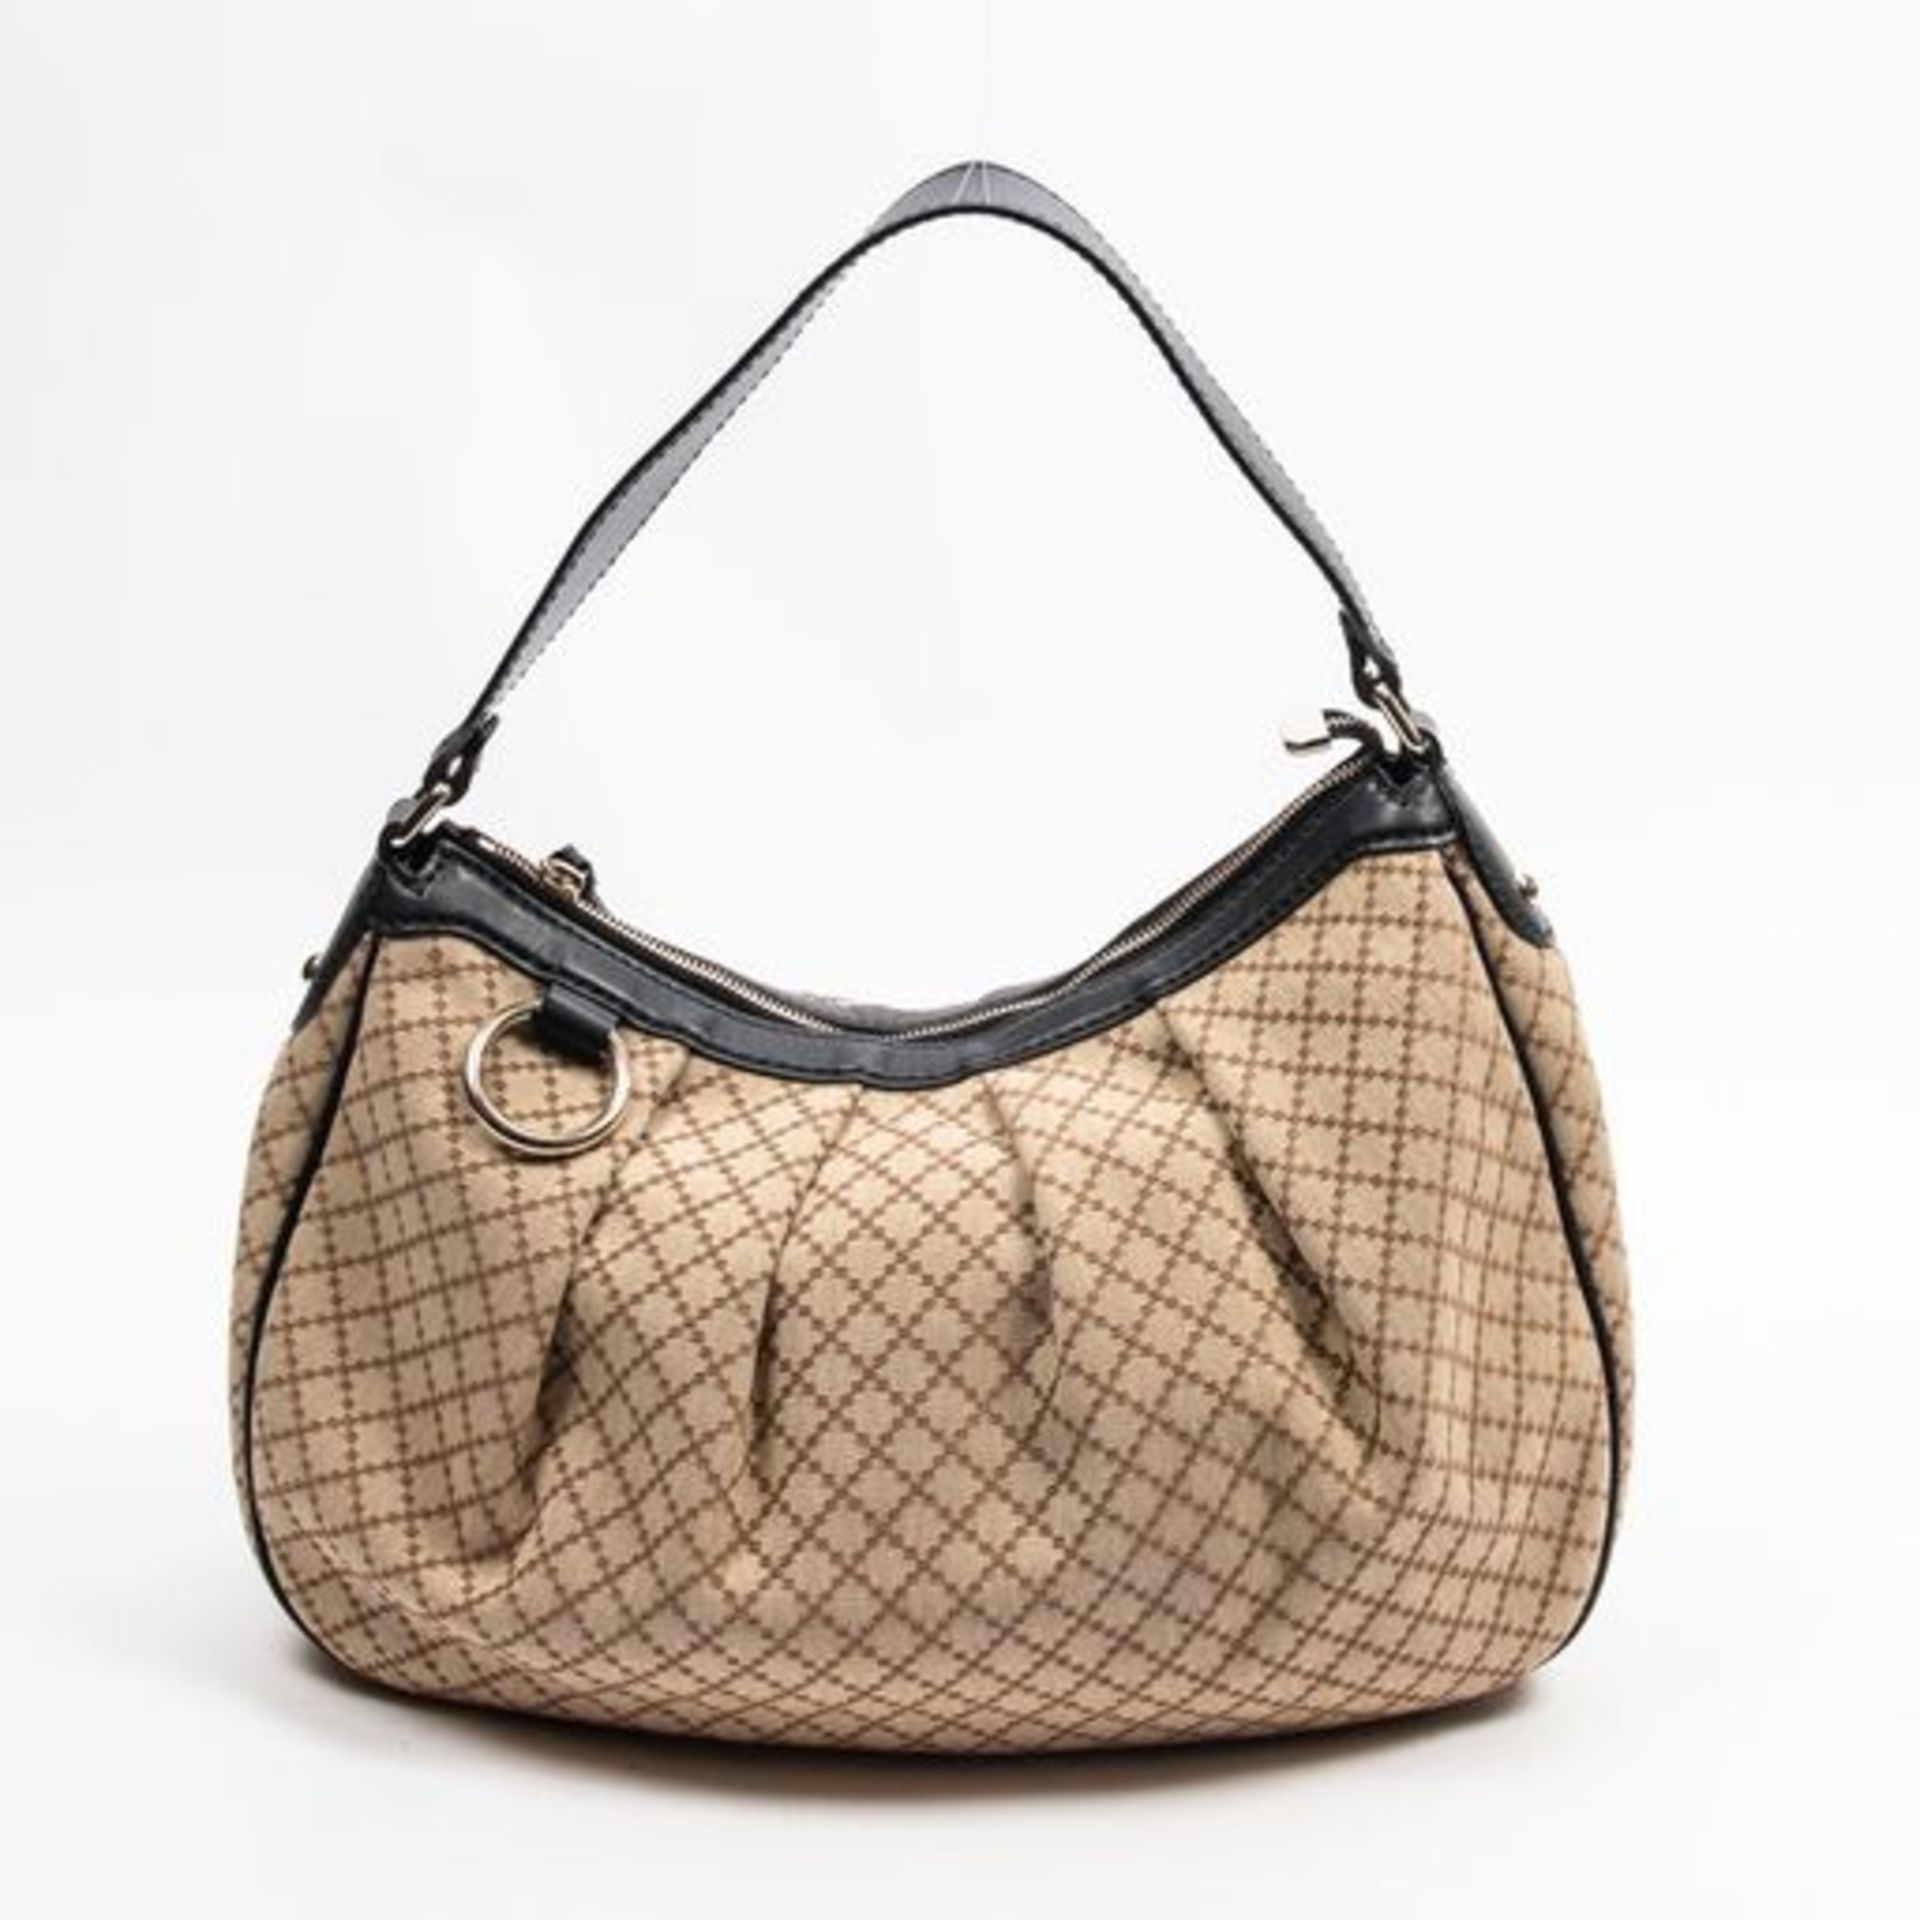 RRP £1185 Gucci Sukey Medium Hobo Shoulder Bag Beige/Black - AAS2128 - Grade AA - (Bags Are Not On